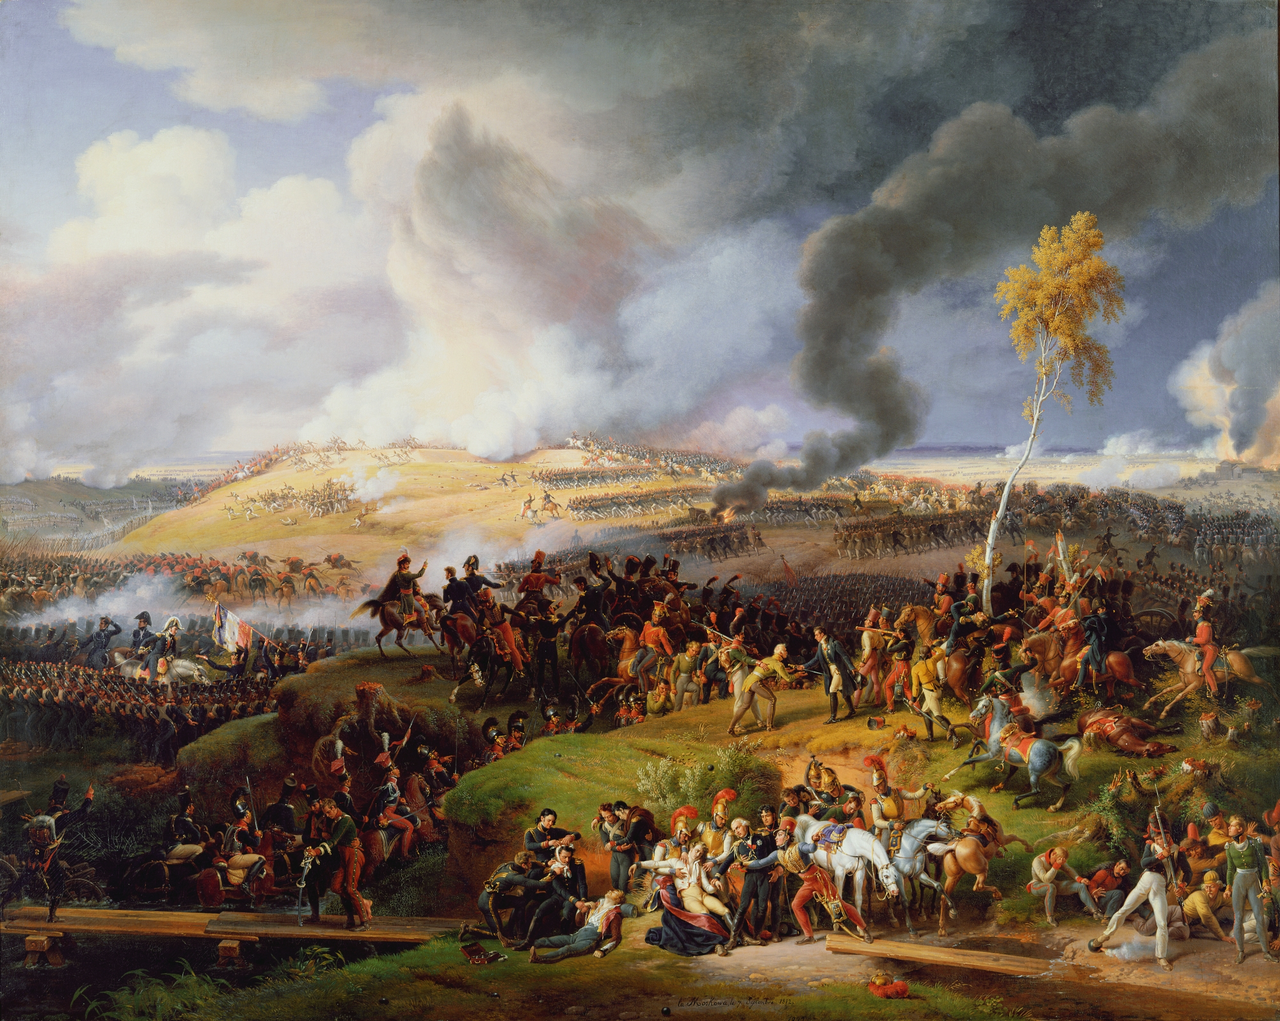 The Battle of Borodino as depicted by Louis Lejeune. The battle was the largest and bloodiest single-day action of the Napoleonic Wars